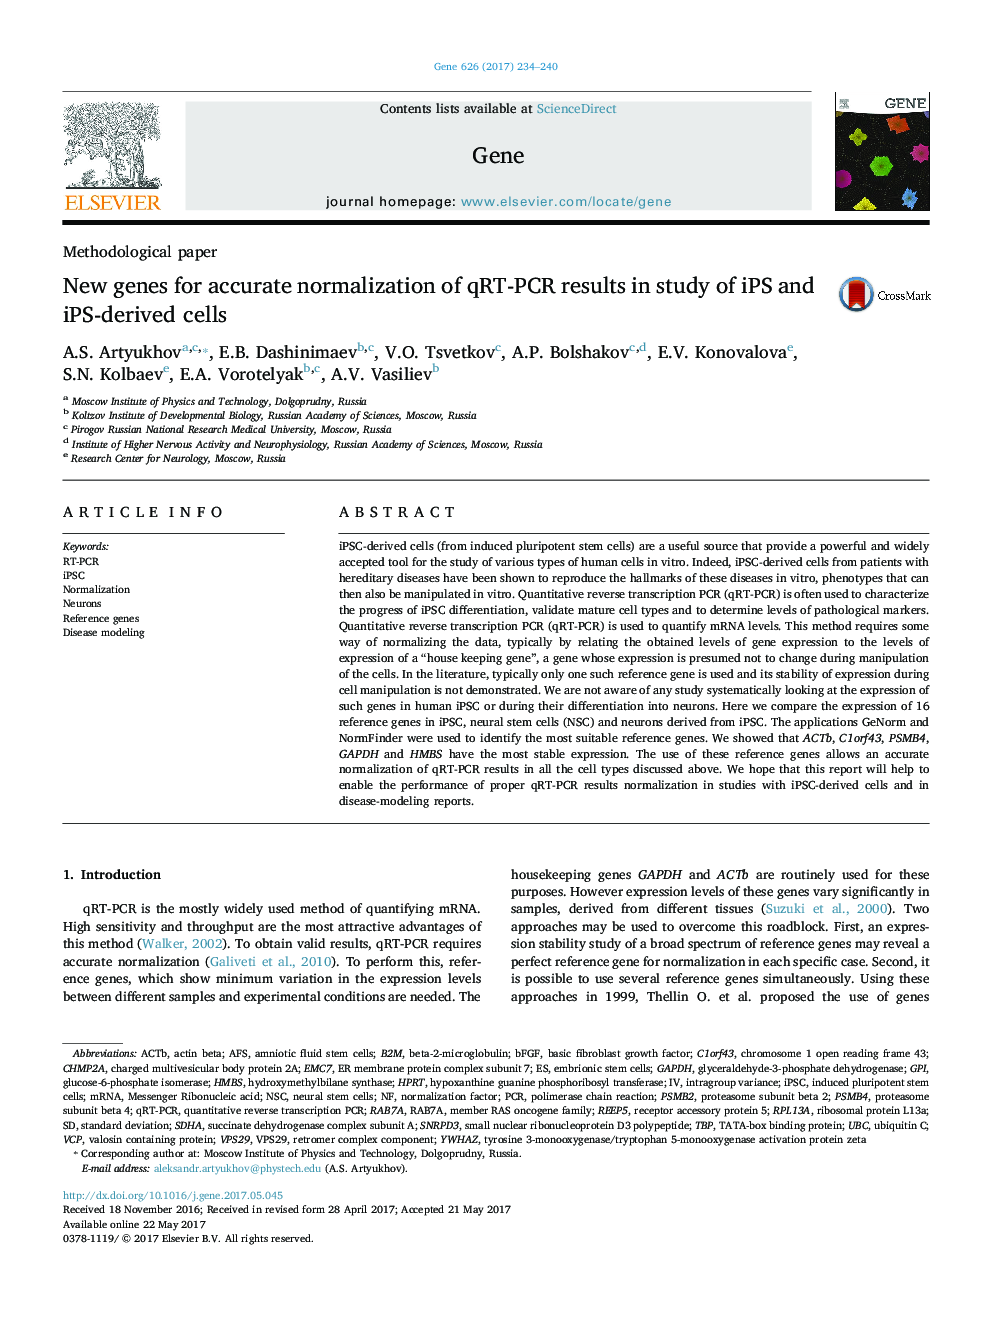 New genes for accurate normalization of qRT-PCR results in study of iPS and iPS-derived cells